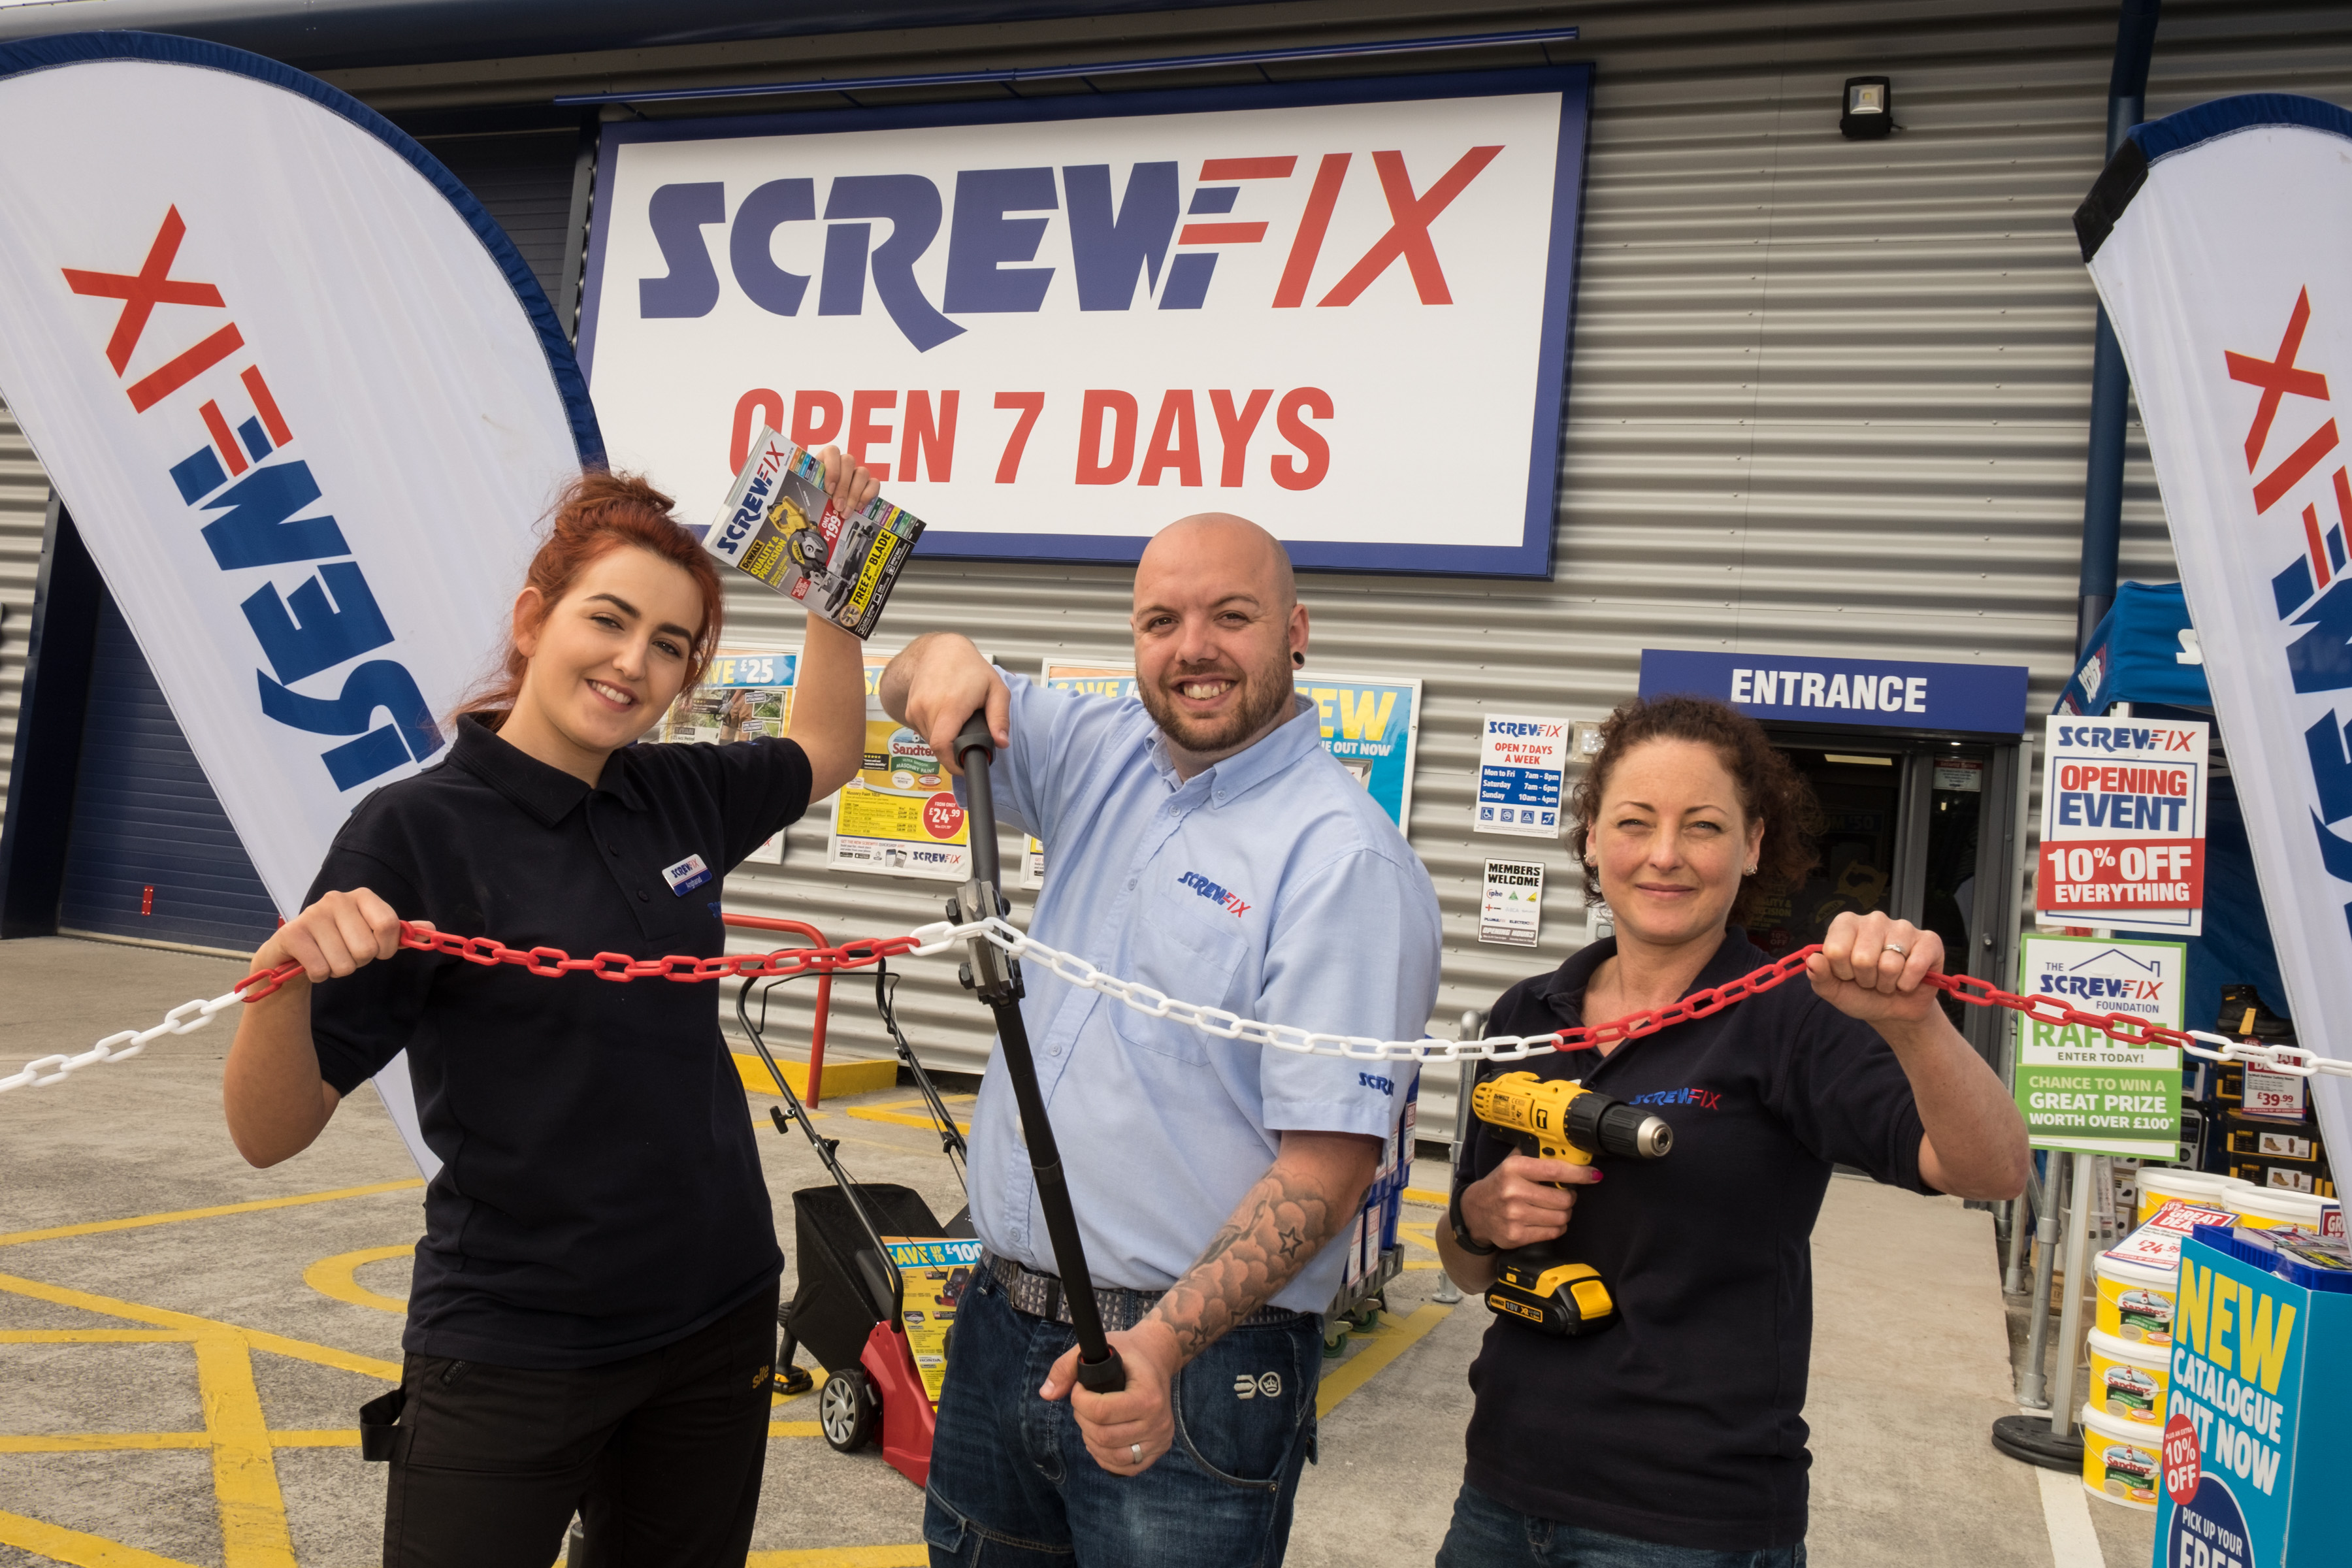 Ebbw Vale’s first Screwfix store is declared a runaway success